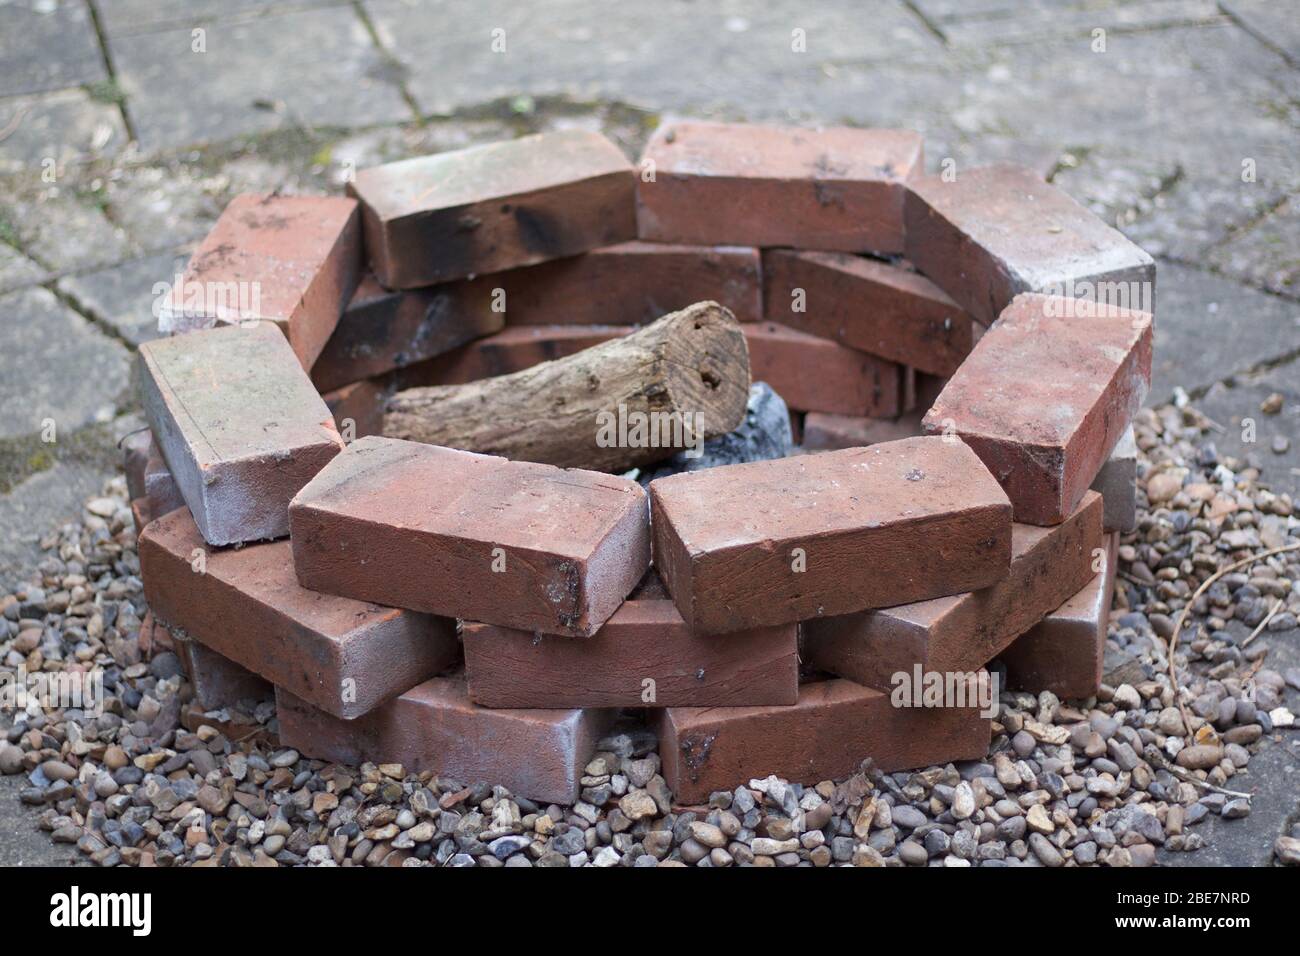 Home made brick built fire pit or barbecue with logs Stock Photo